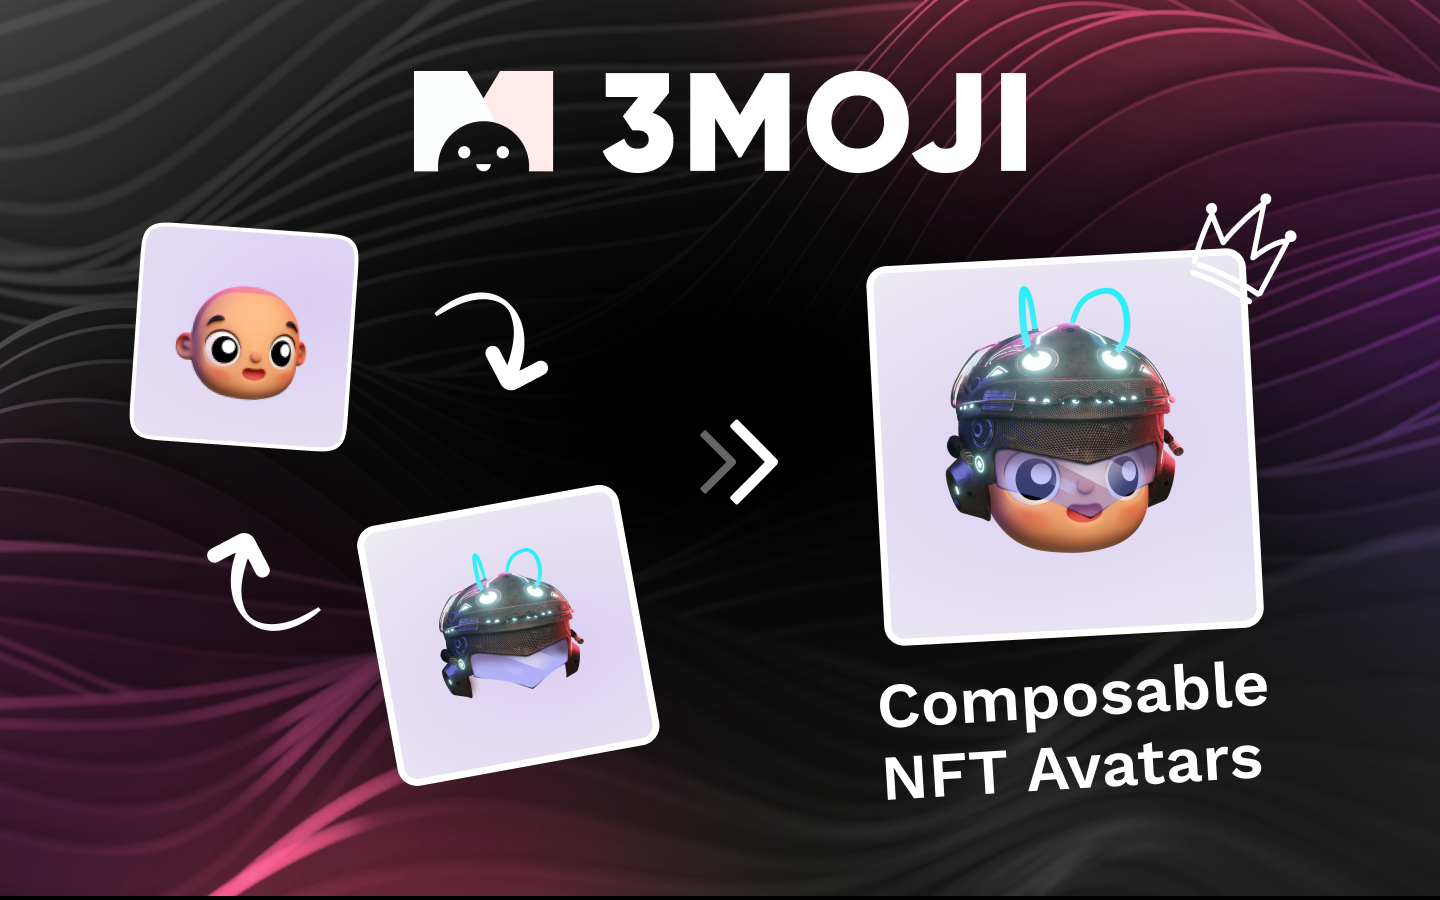 How Does 3moji Work? cover image